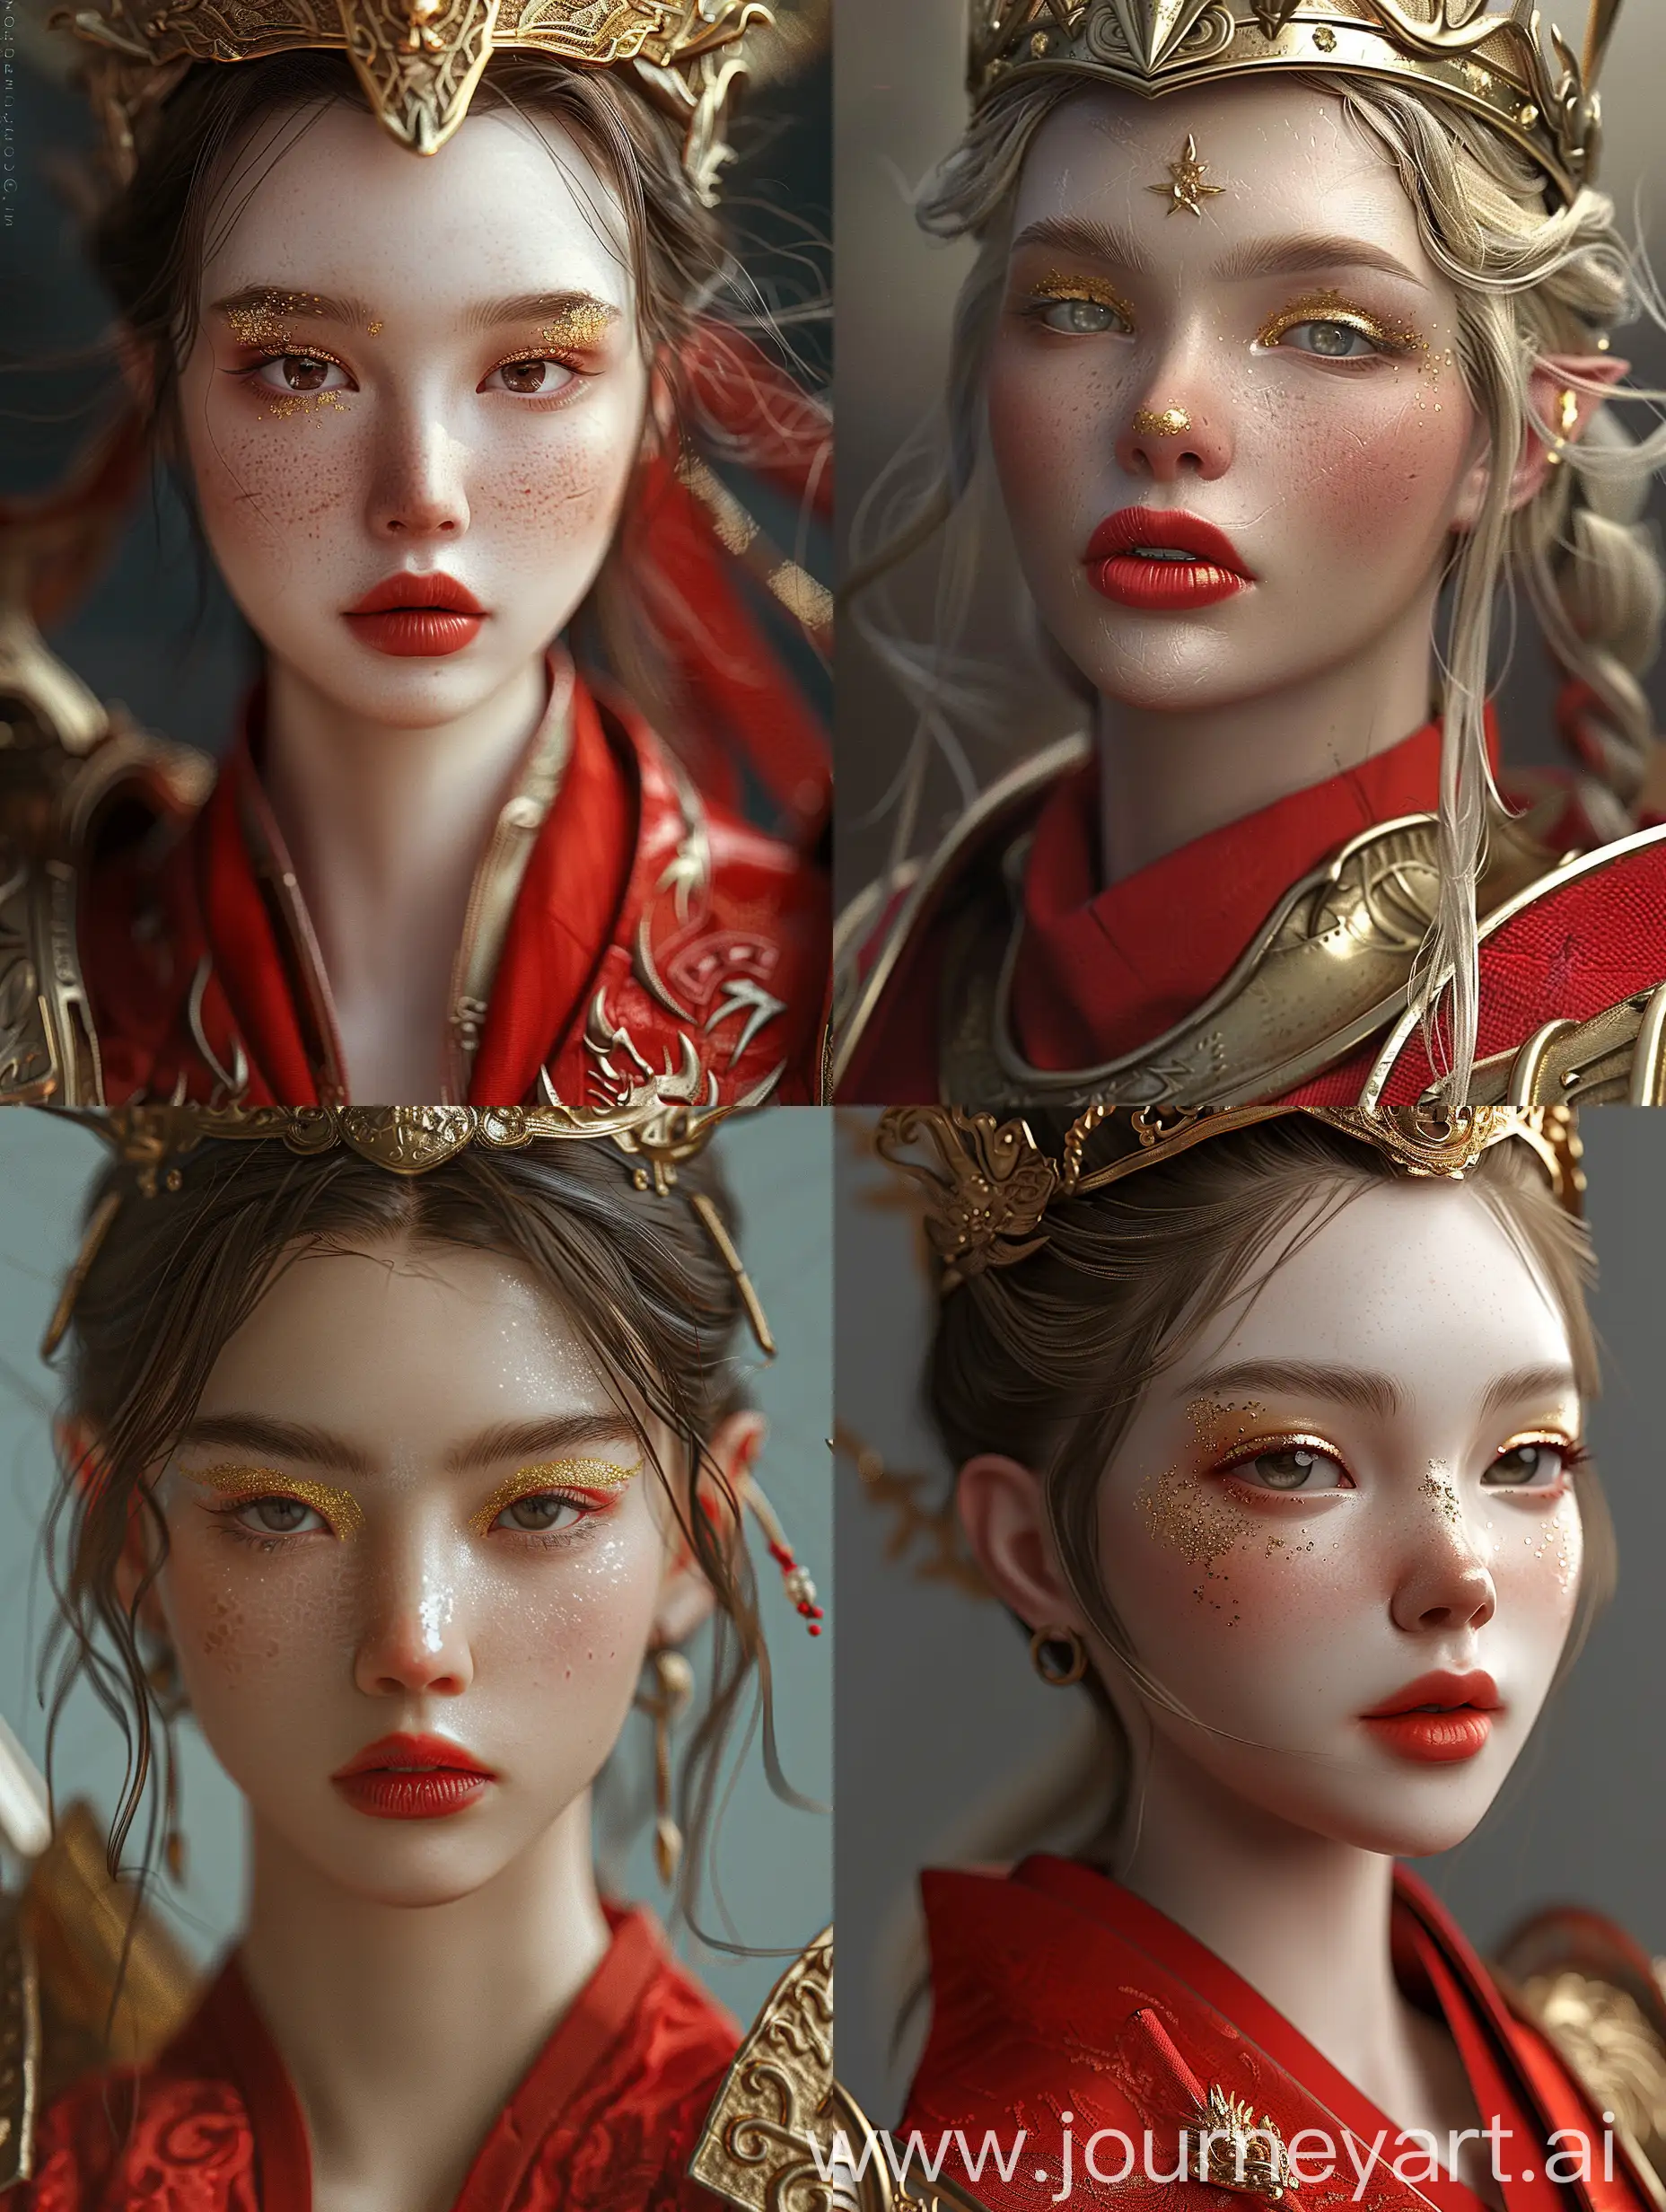 Golden-Armored-Warrior-Queen-with-Delicate-Features-and-Charming-Gaze